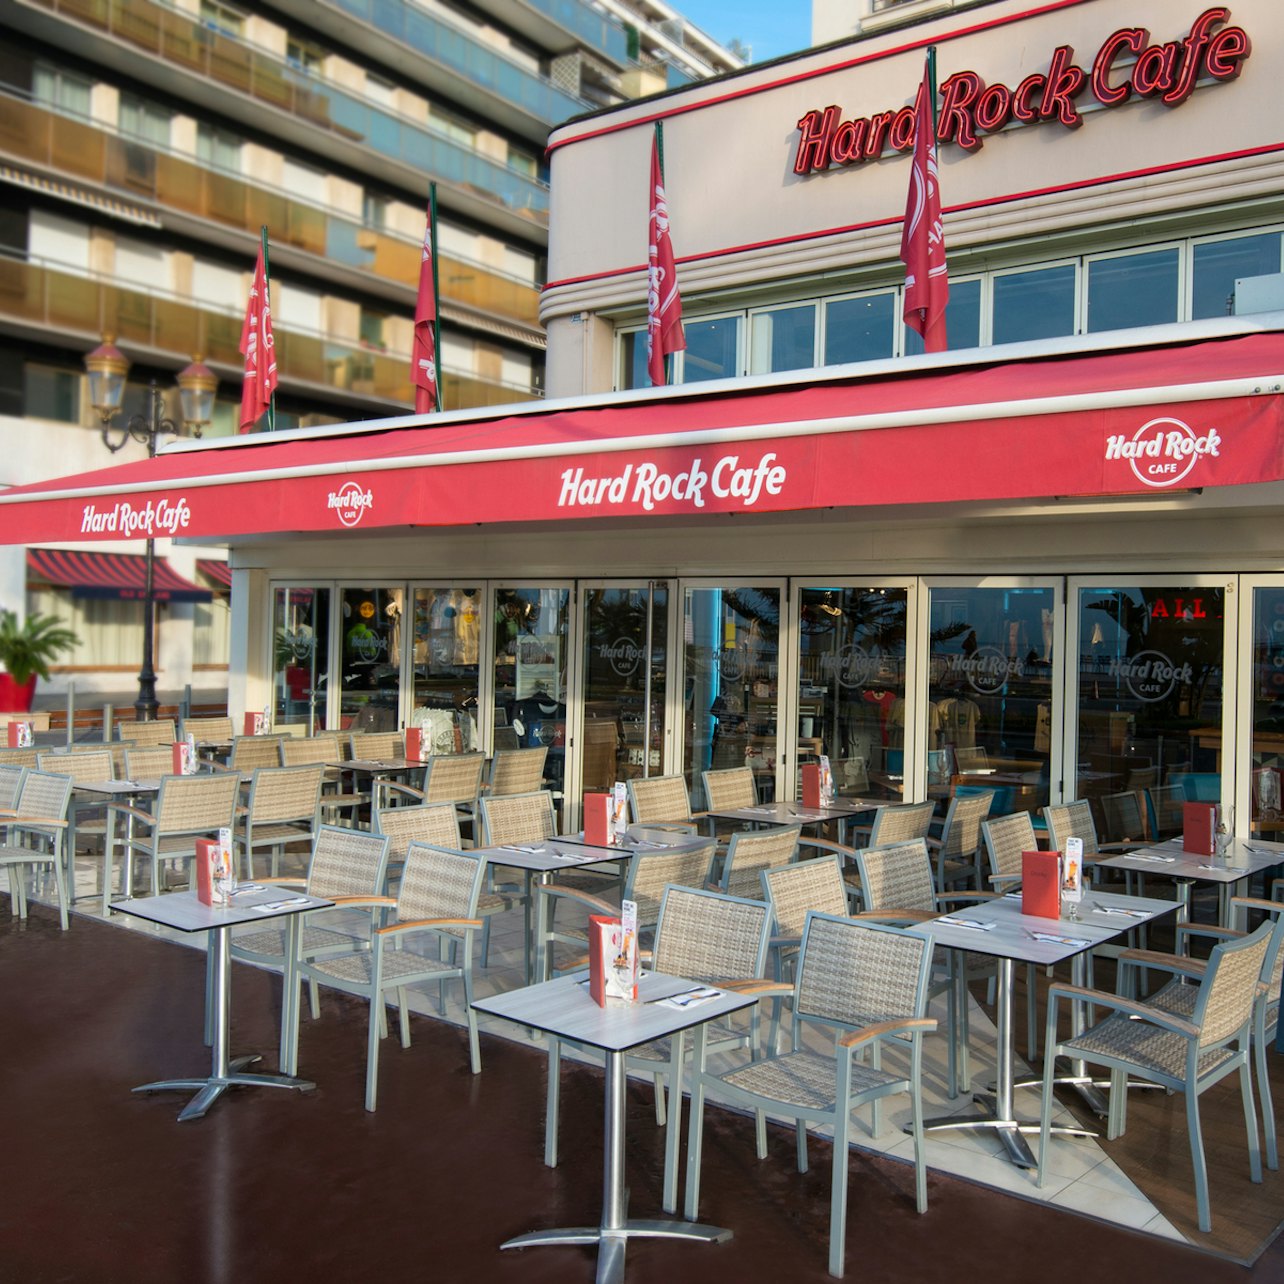 Hard Rock Cafe Nice - Accommodations in Nice